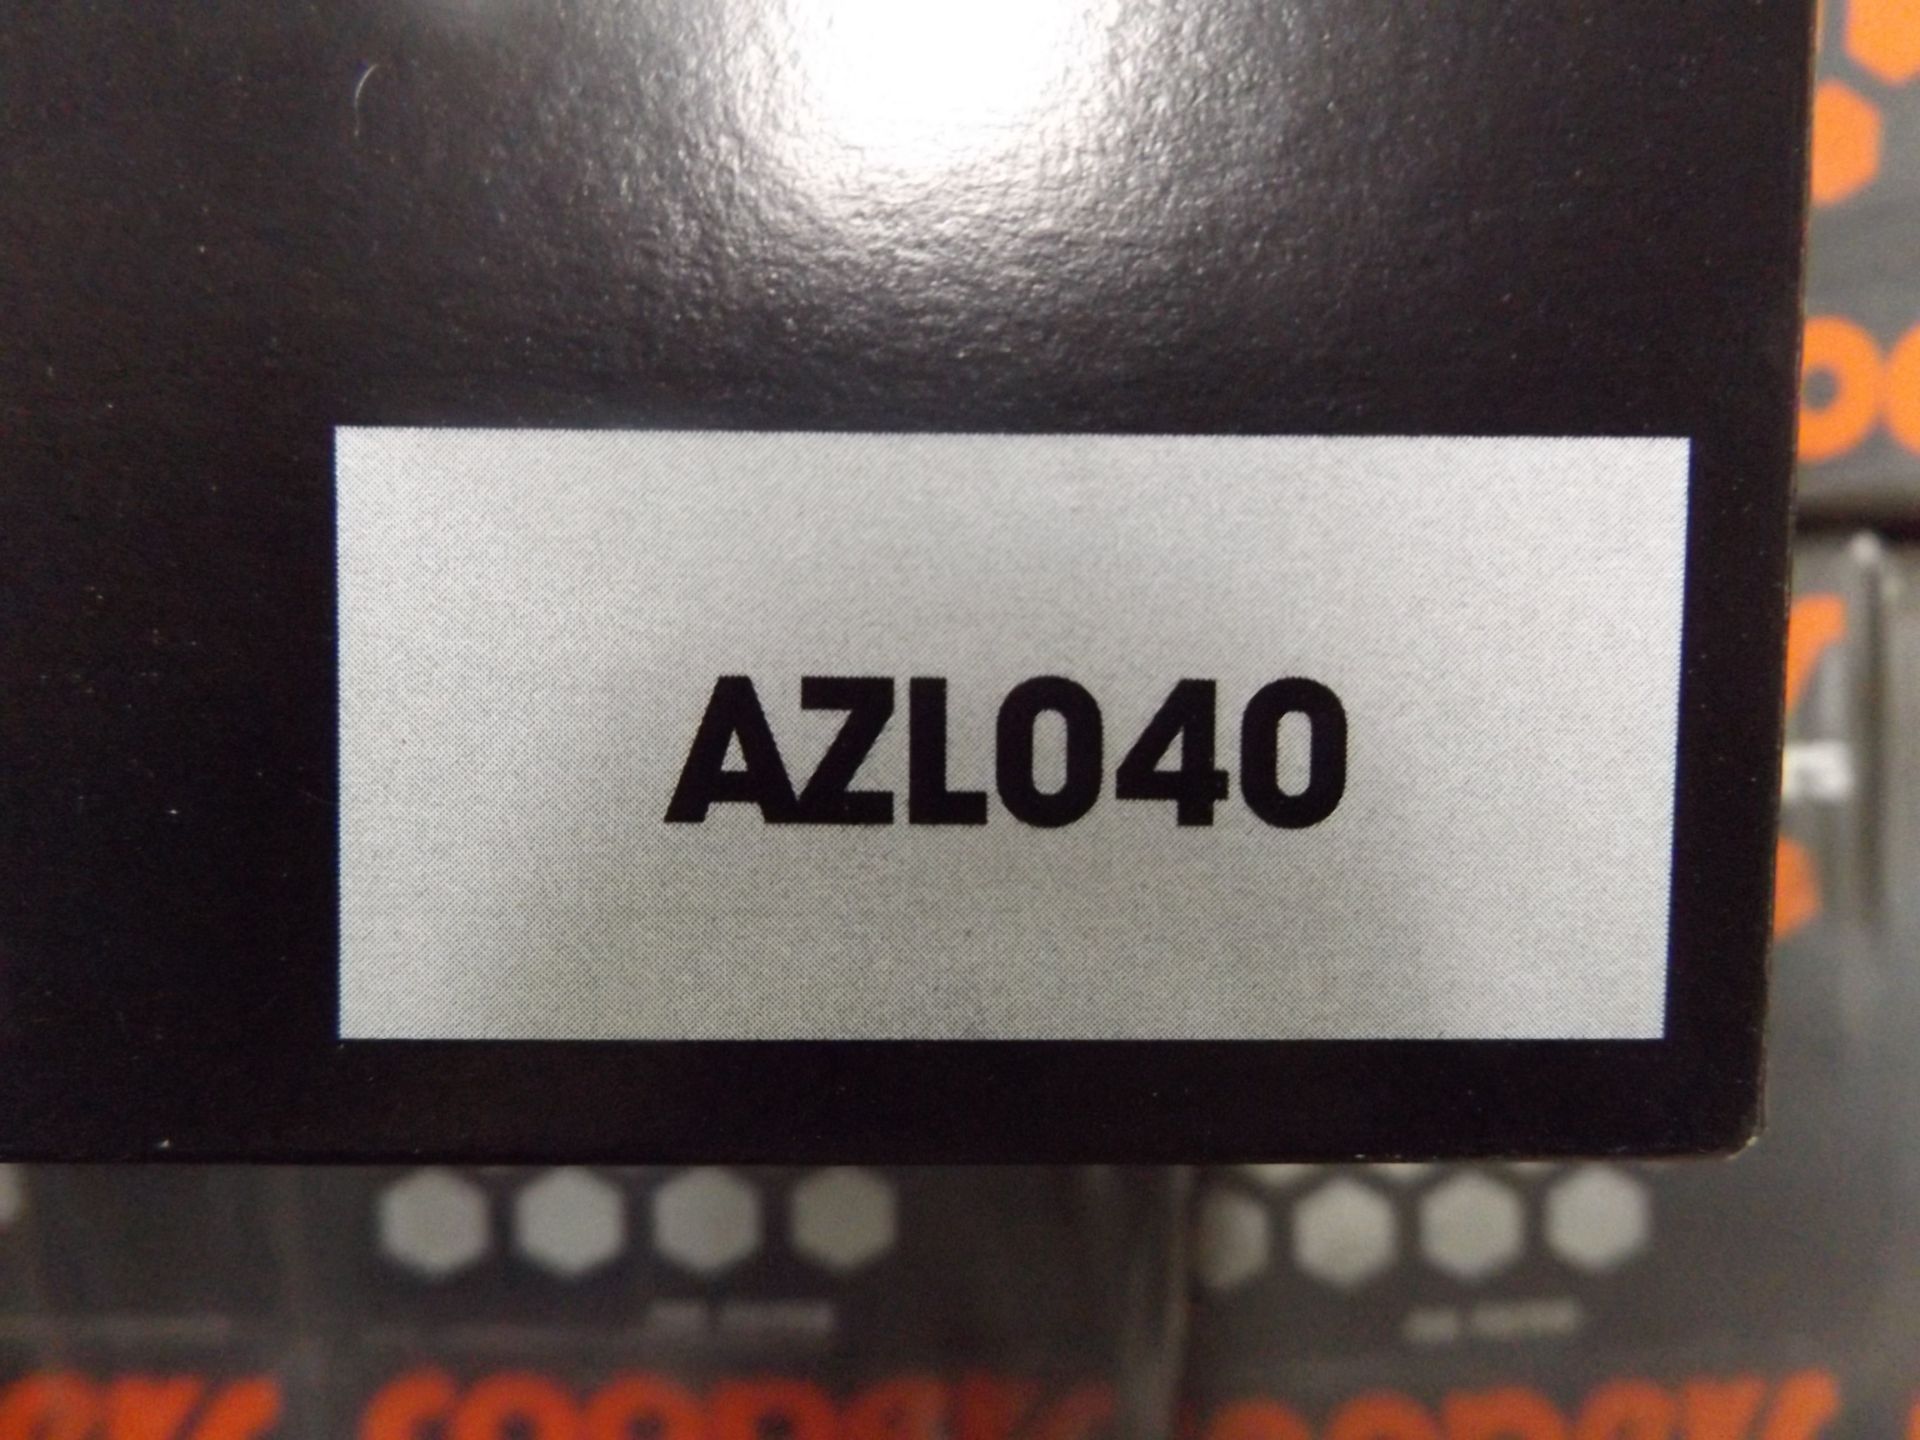 Approx. 480 x Bedford Coopers AZL040 Oil Filters - Image 5 of 5